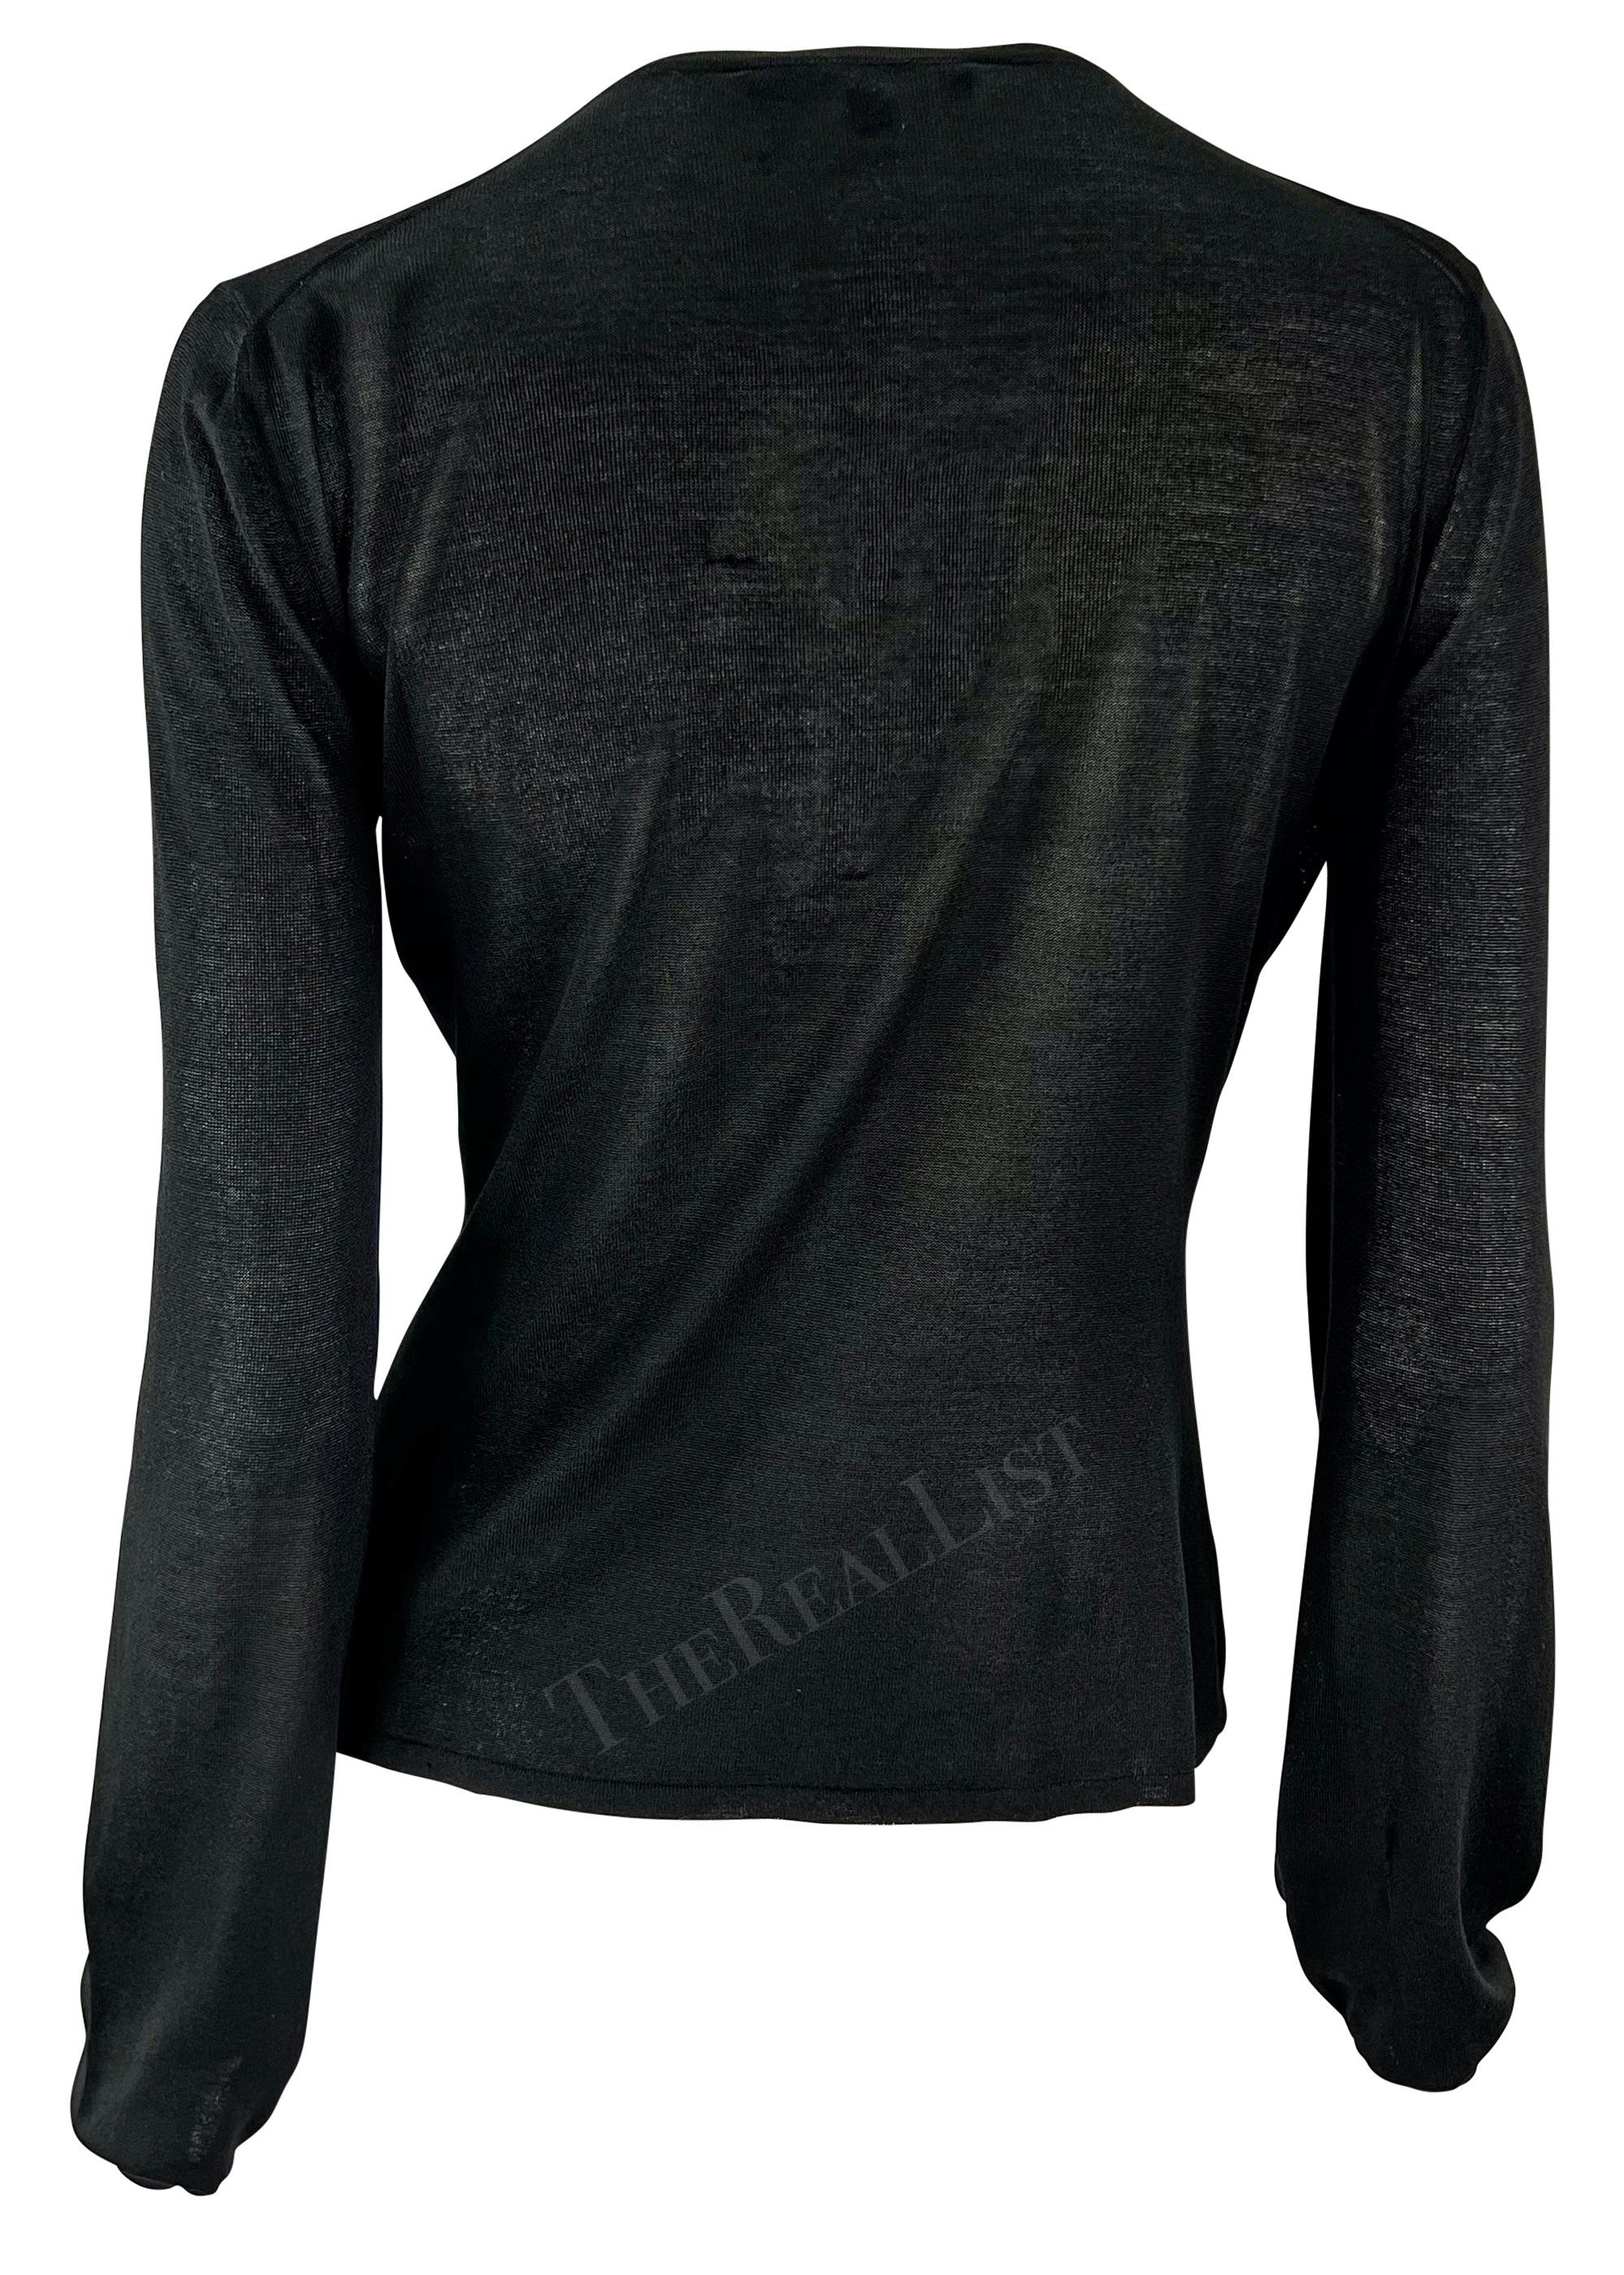 F/W 1999 Gucci by Tom Ford Runway Black Leather Flower Plunge Sheer Knit Top For Sale 5